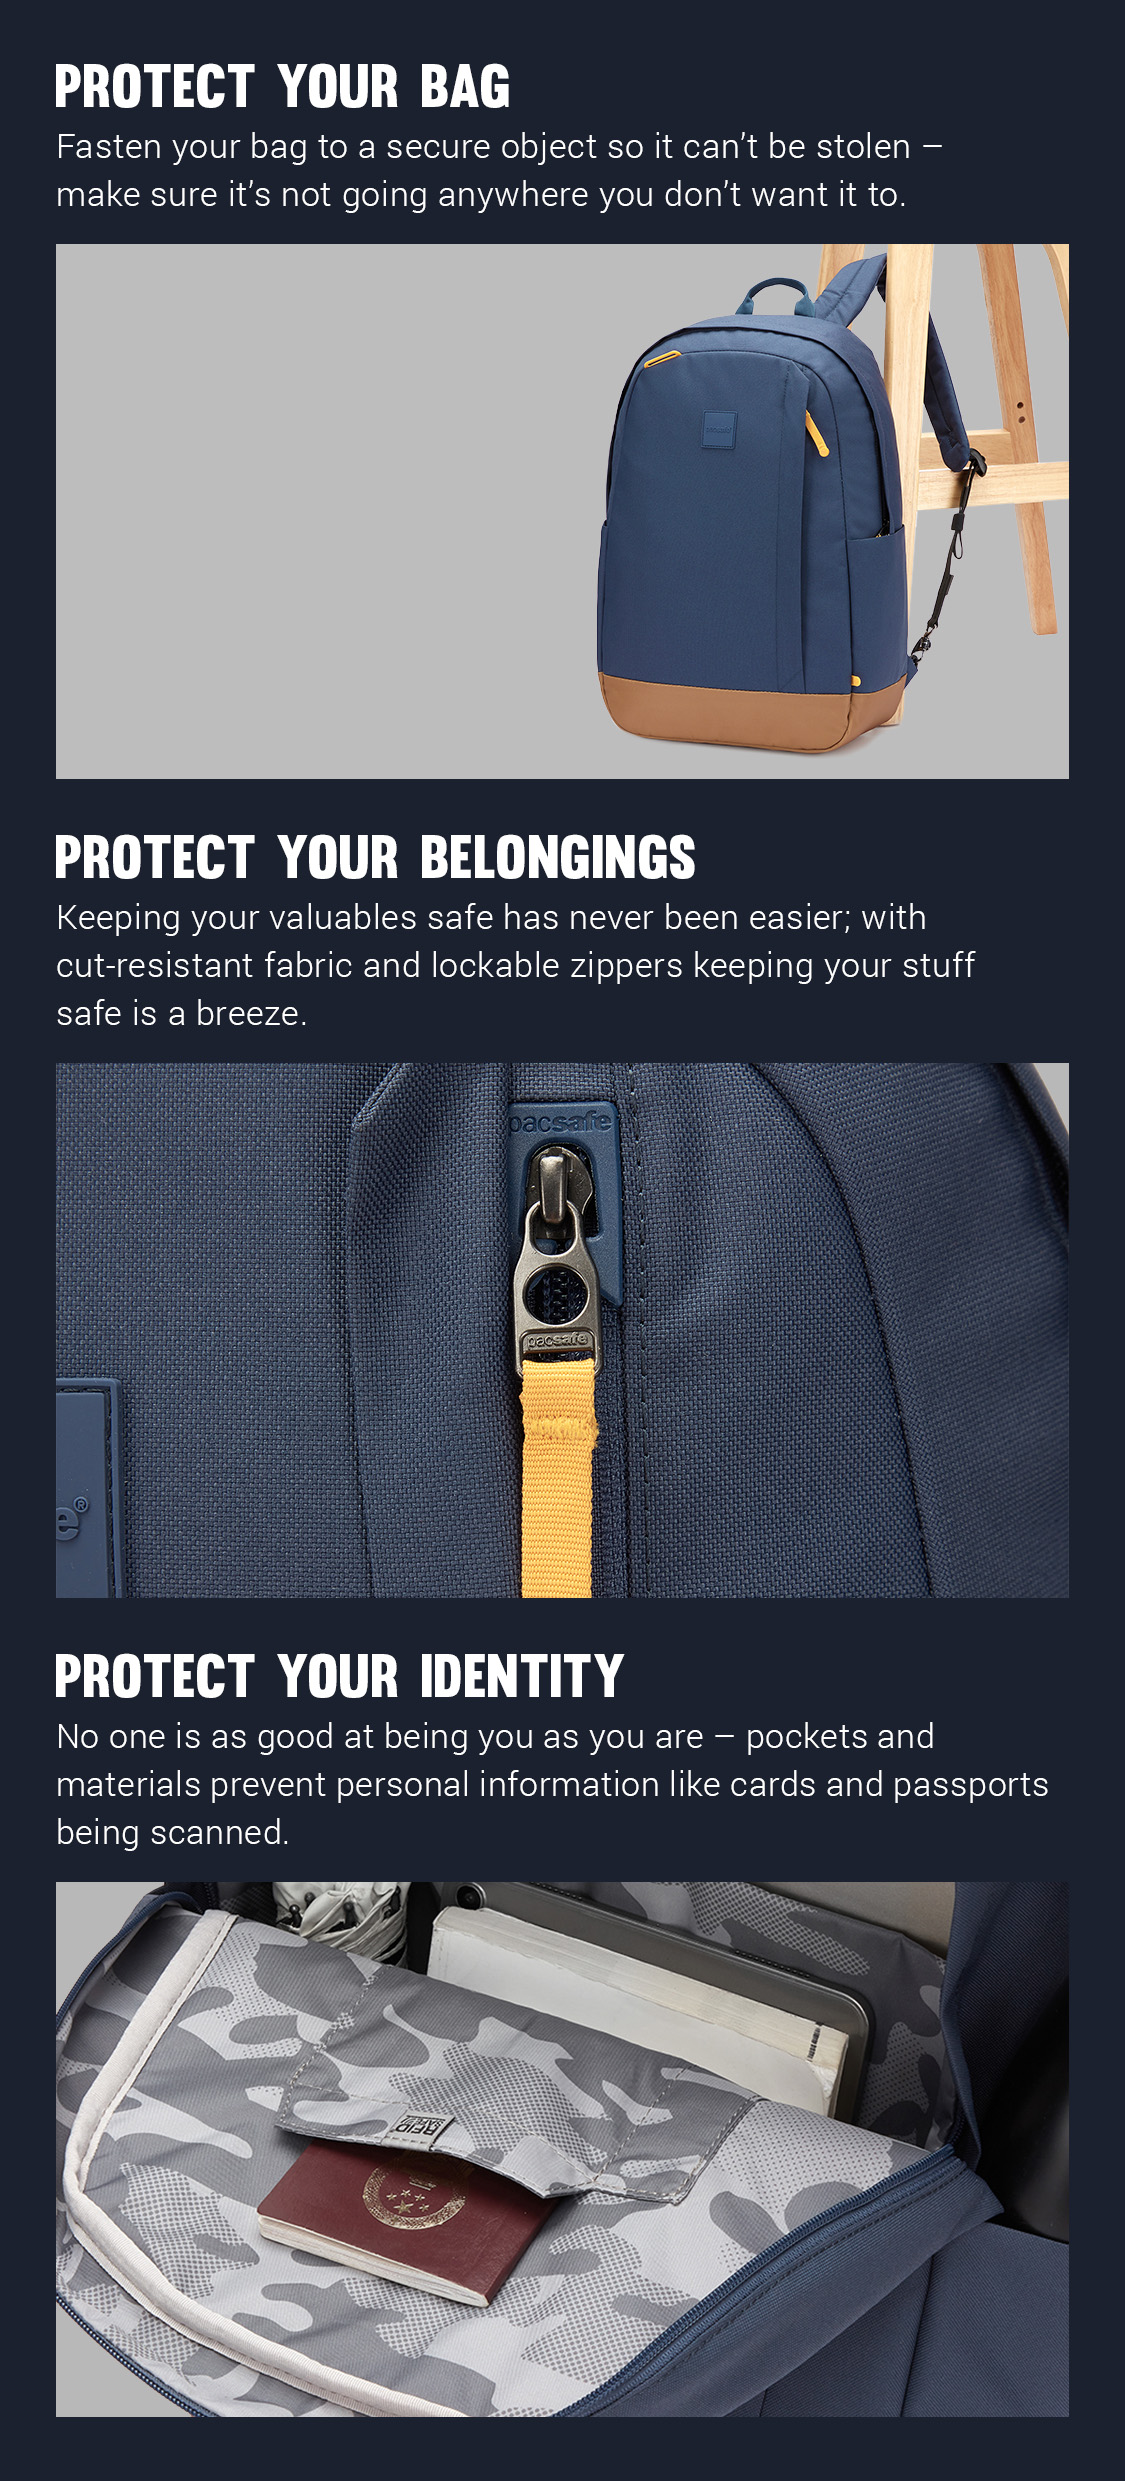 Protect Your Bag - Fastern your bag to a secure object so it can't be stolen - make sure it's not going anywhere you don't want it to. 
Protect Your Belongings - Keeping your valuable safe has never been easier; with cut-resistant fabric and lockable zippers keeping your stuff safe is a breeze.
Protect Your Identity - No one is as good at being you as you are - pockets and materials prevent personal information like cards and passports being scanned.